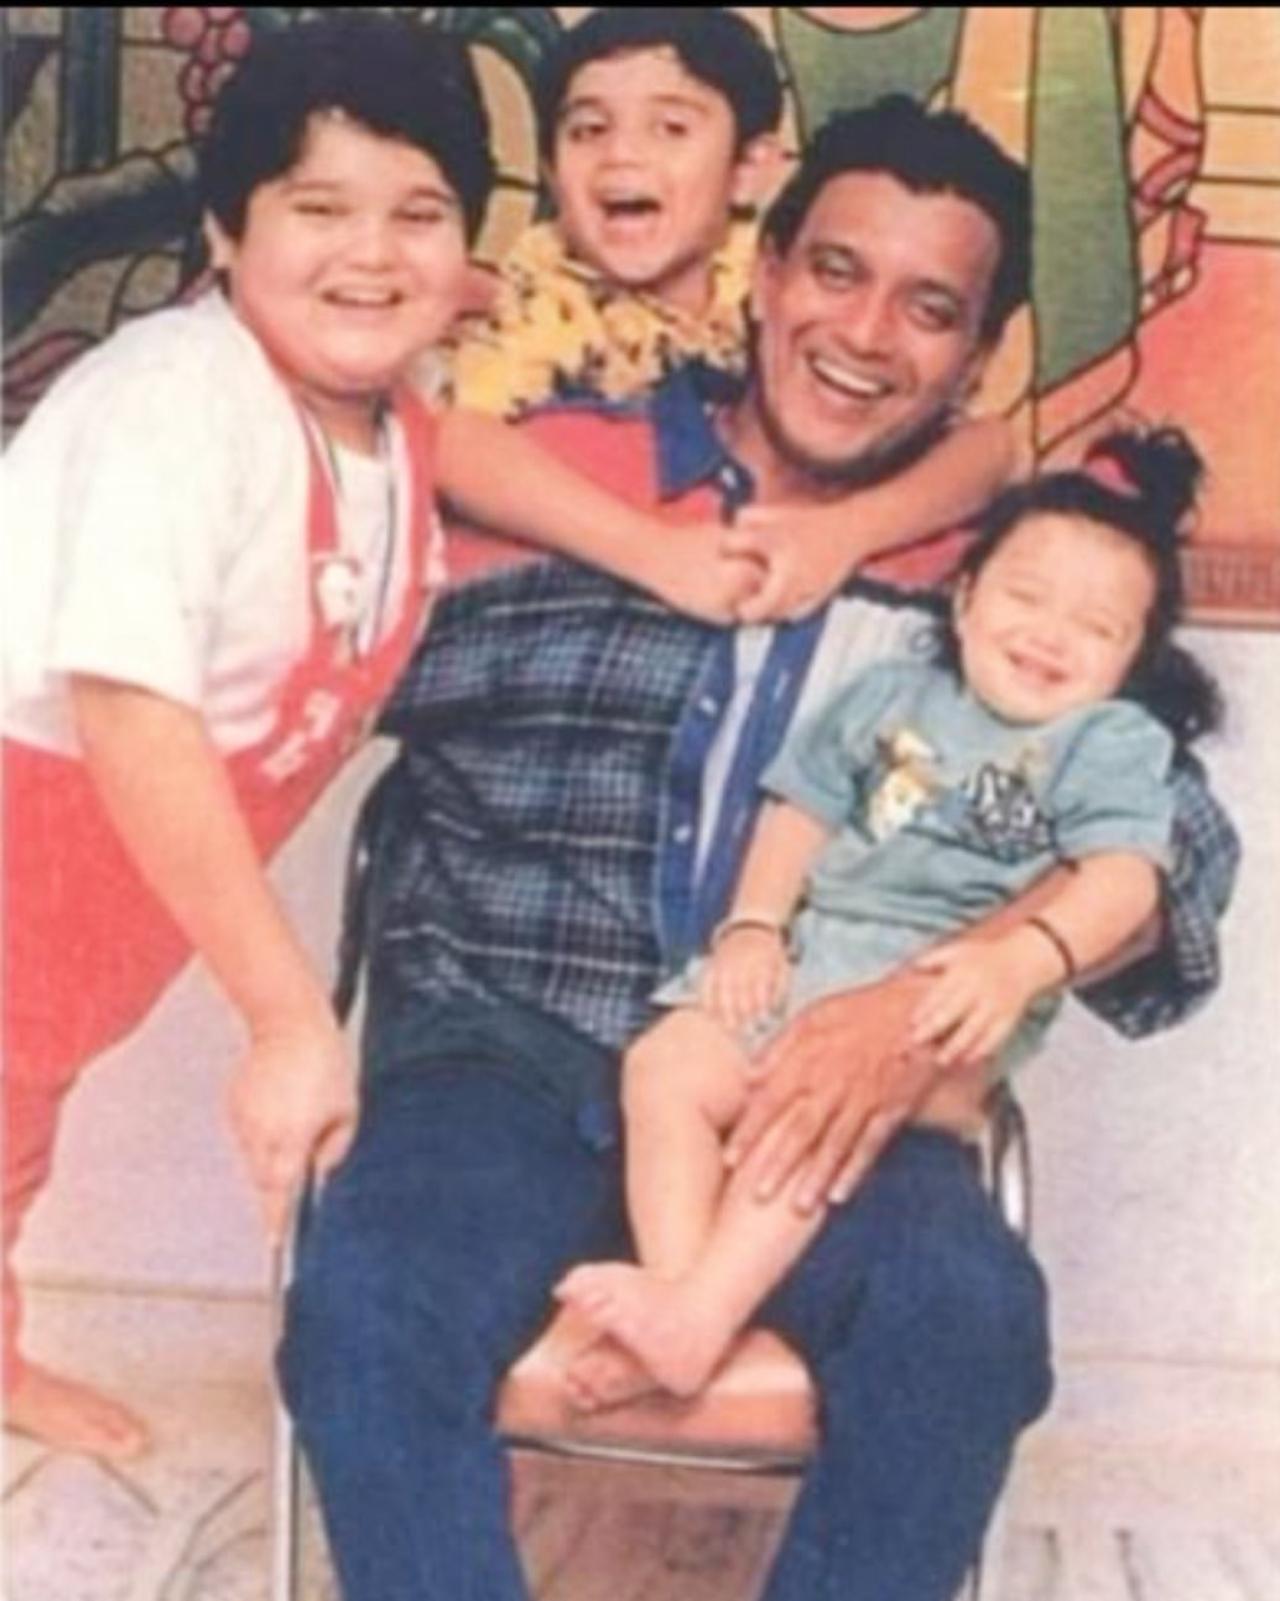 Mithun rose to fame with his film, his dancing skills and his looks and unique sense of style. On the personal front, Chakraborty married actress Yogita Bali. The couple are parents to four kids- Mimoh Chakraborty, Ushmey Chakraborty, Namashi Chakraborty, and Dishani Chakraborty